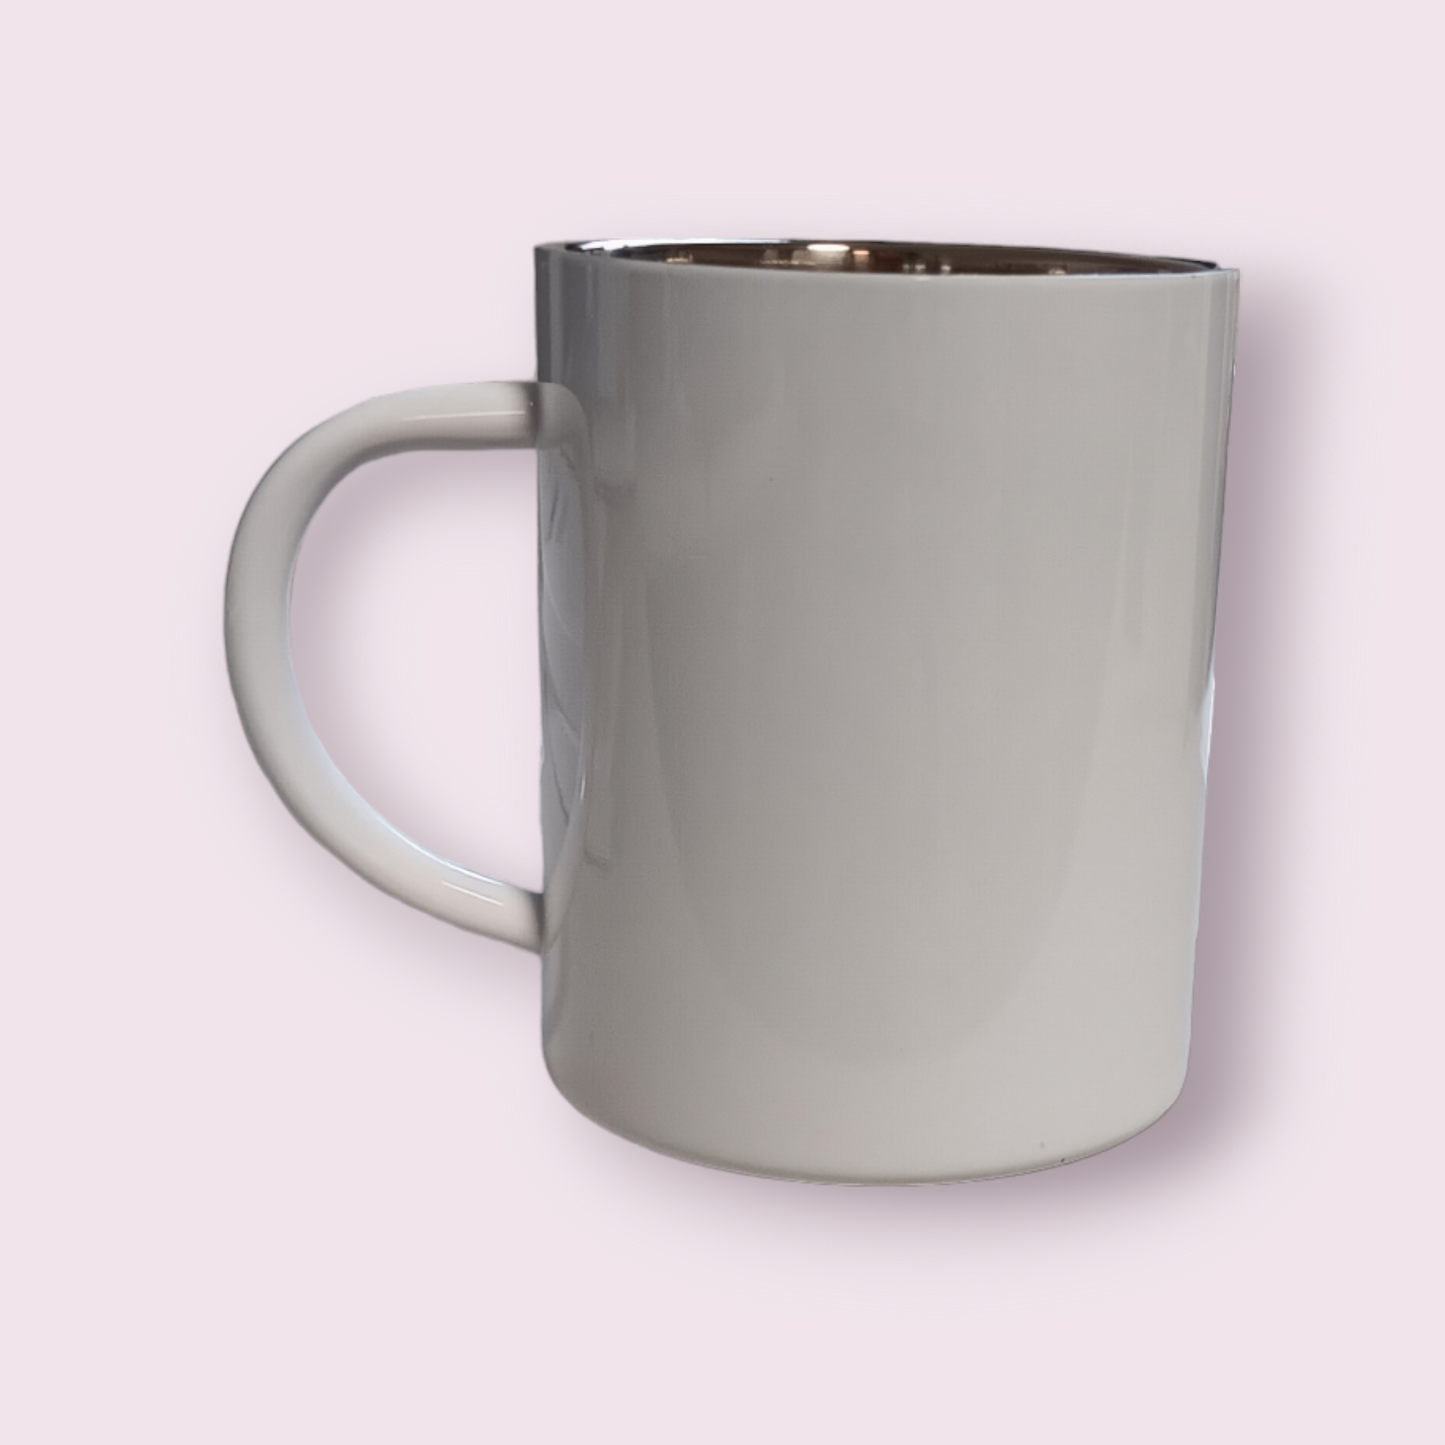 Create Your Own 15oz Stainless Steel Camping Style Coffee Mug